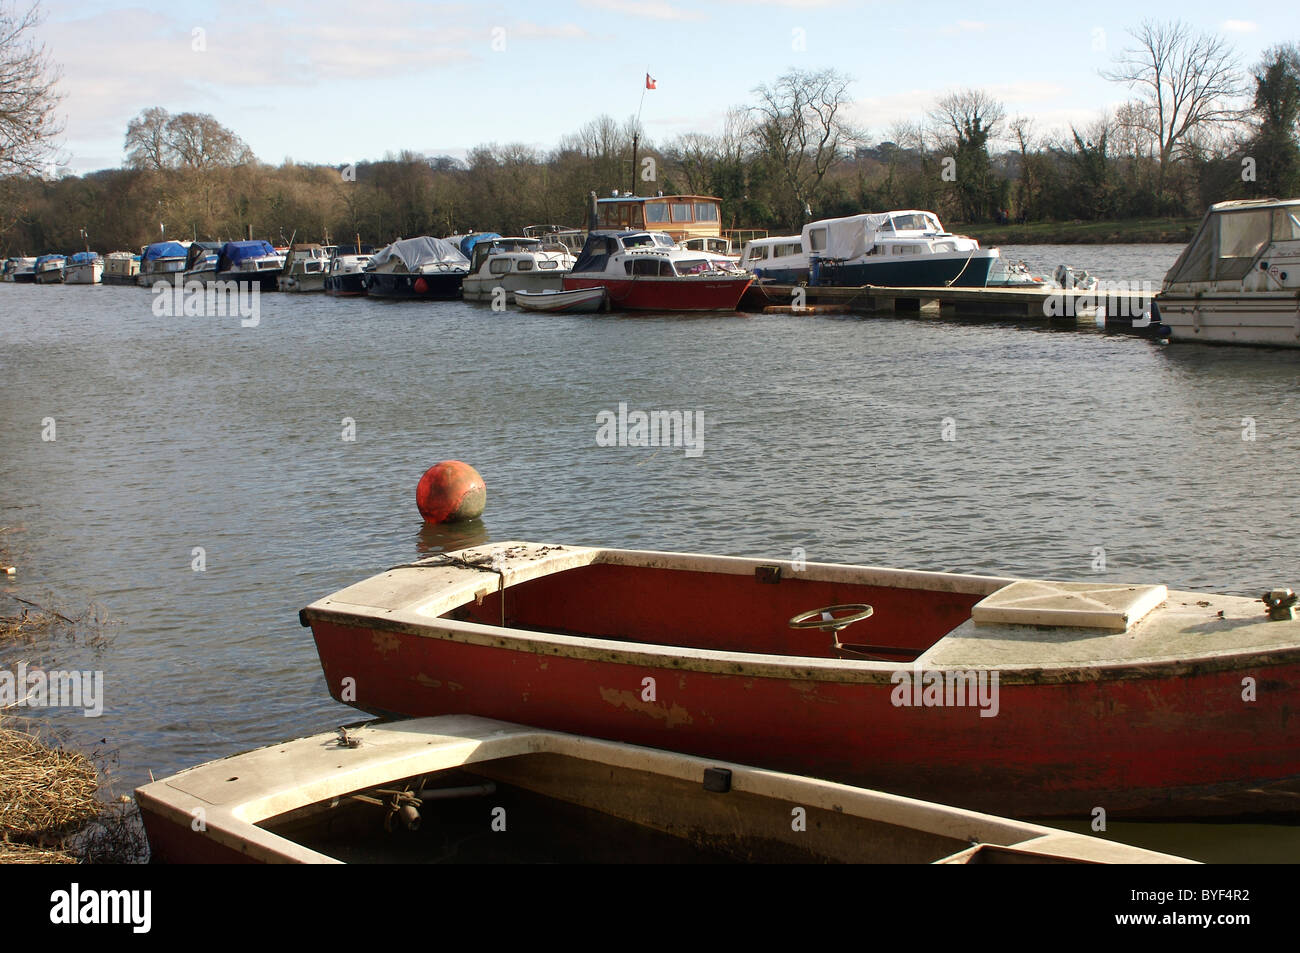 Rowboats, pleasurecraft and houseboats moored on the River Thames Stock Photo